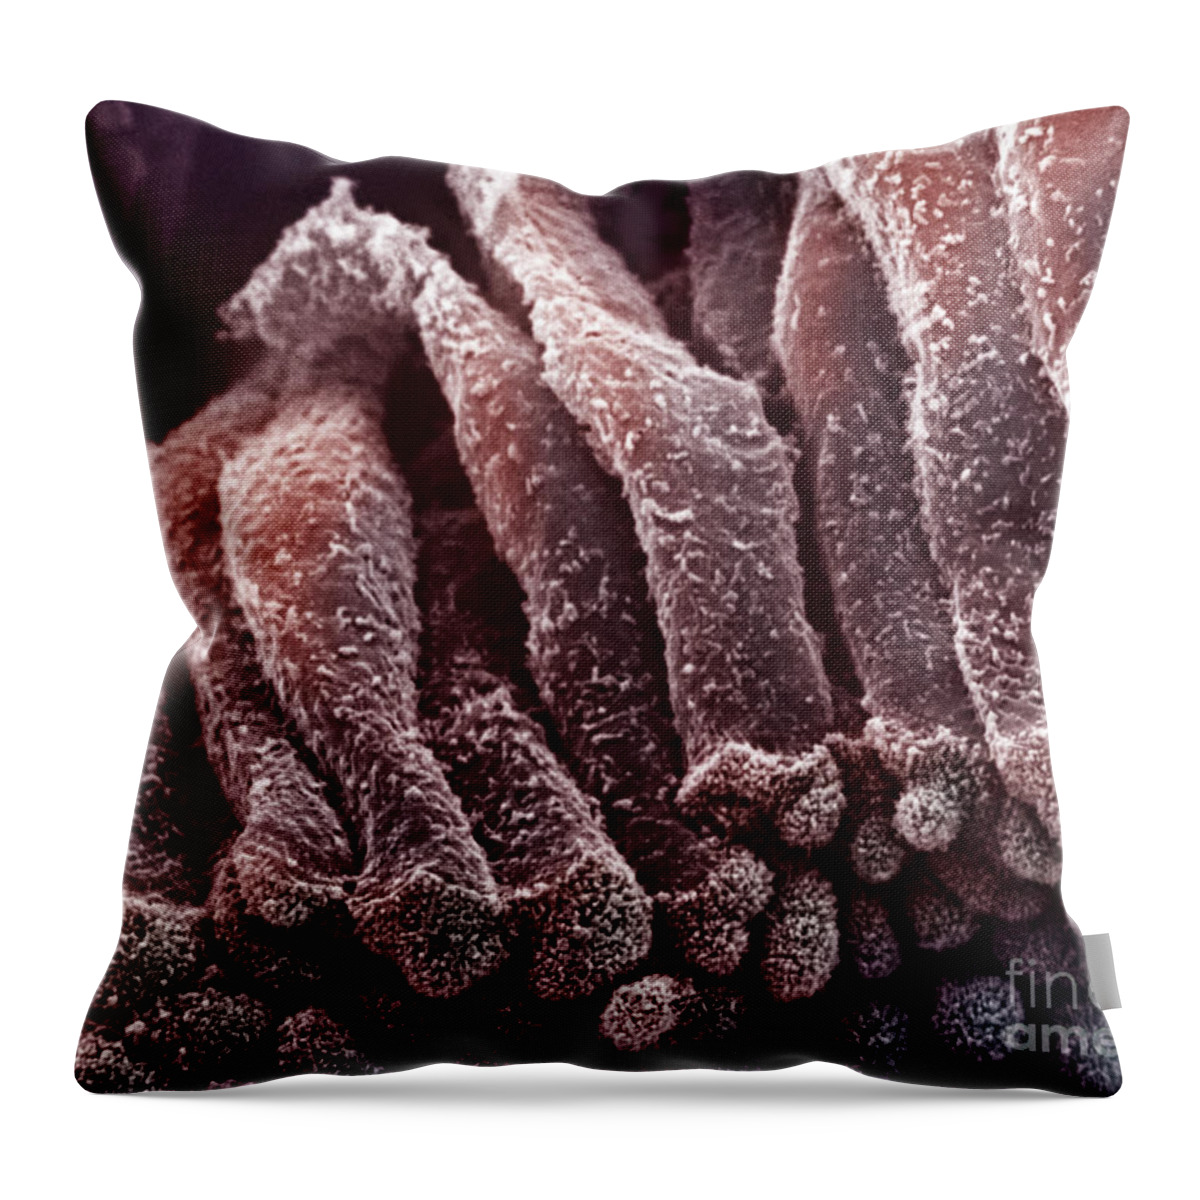 Cytology Throw Pillow featuring the photograph Epithelium Of The Gall Bladder by Science Source